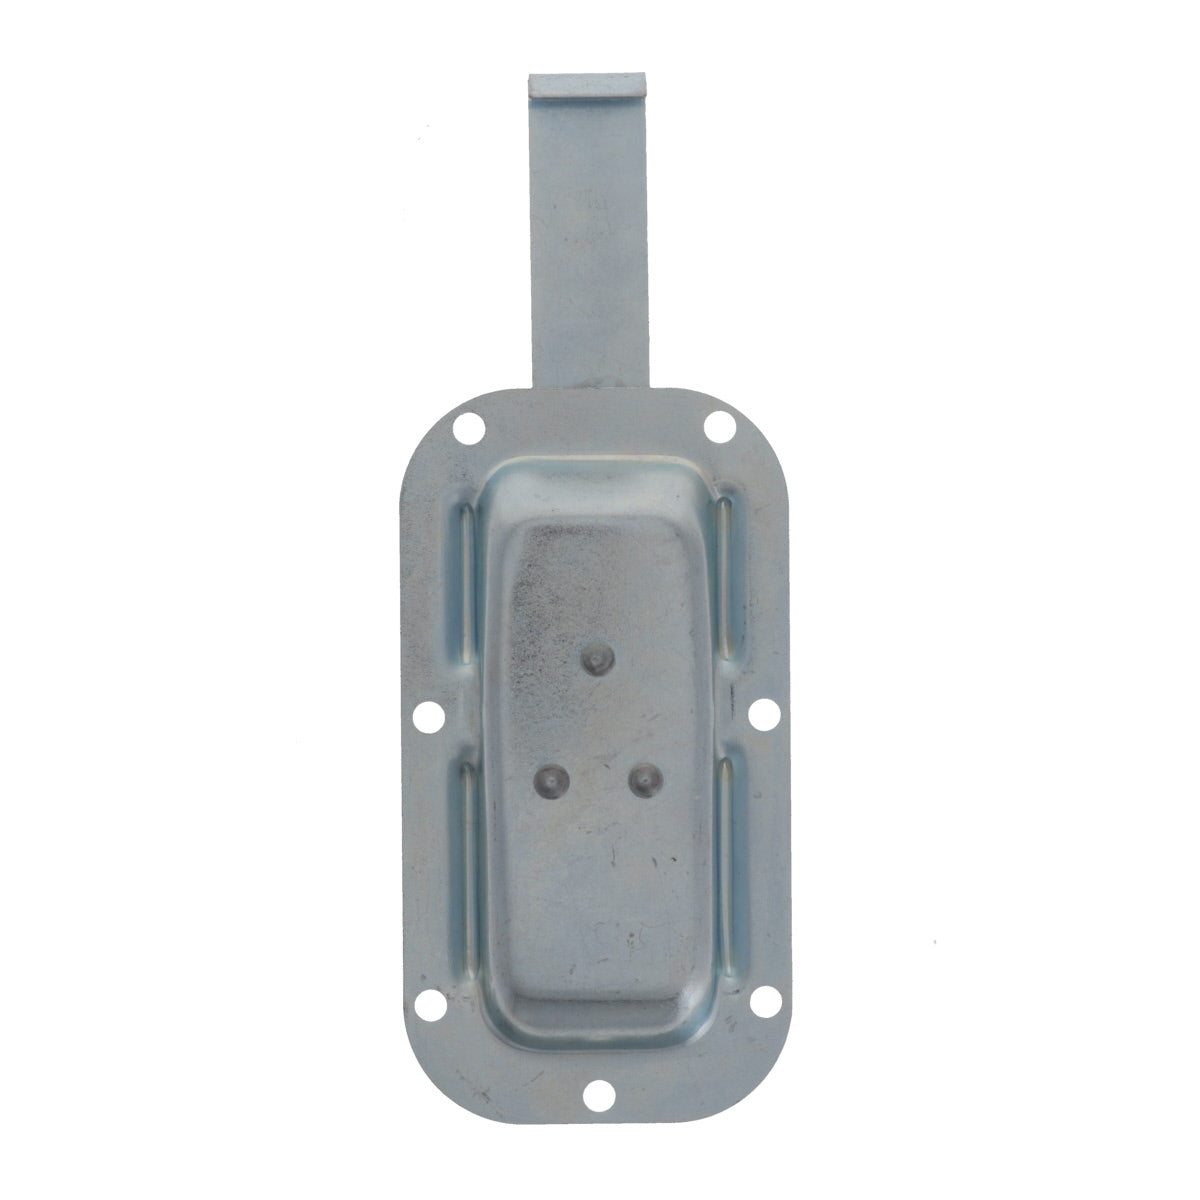 Recessed Lever Operated Drawlatch, back view